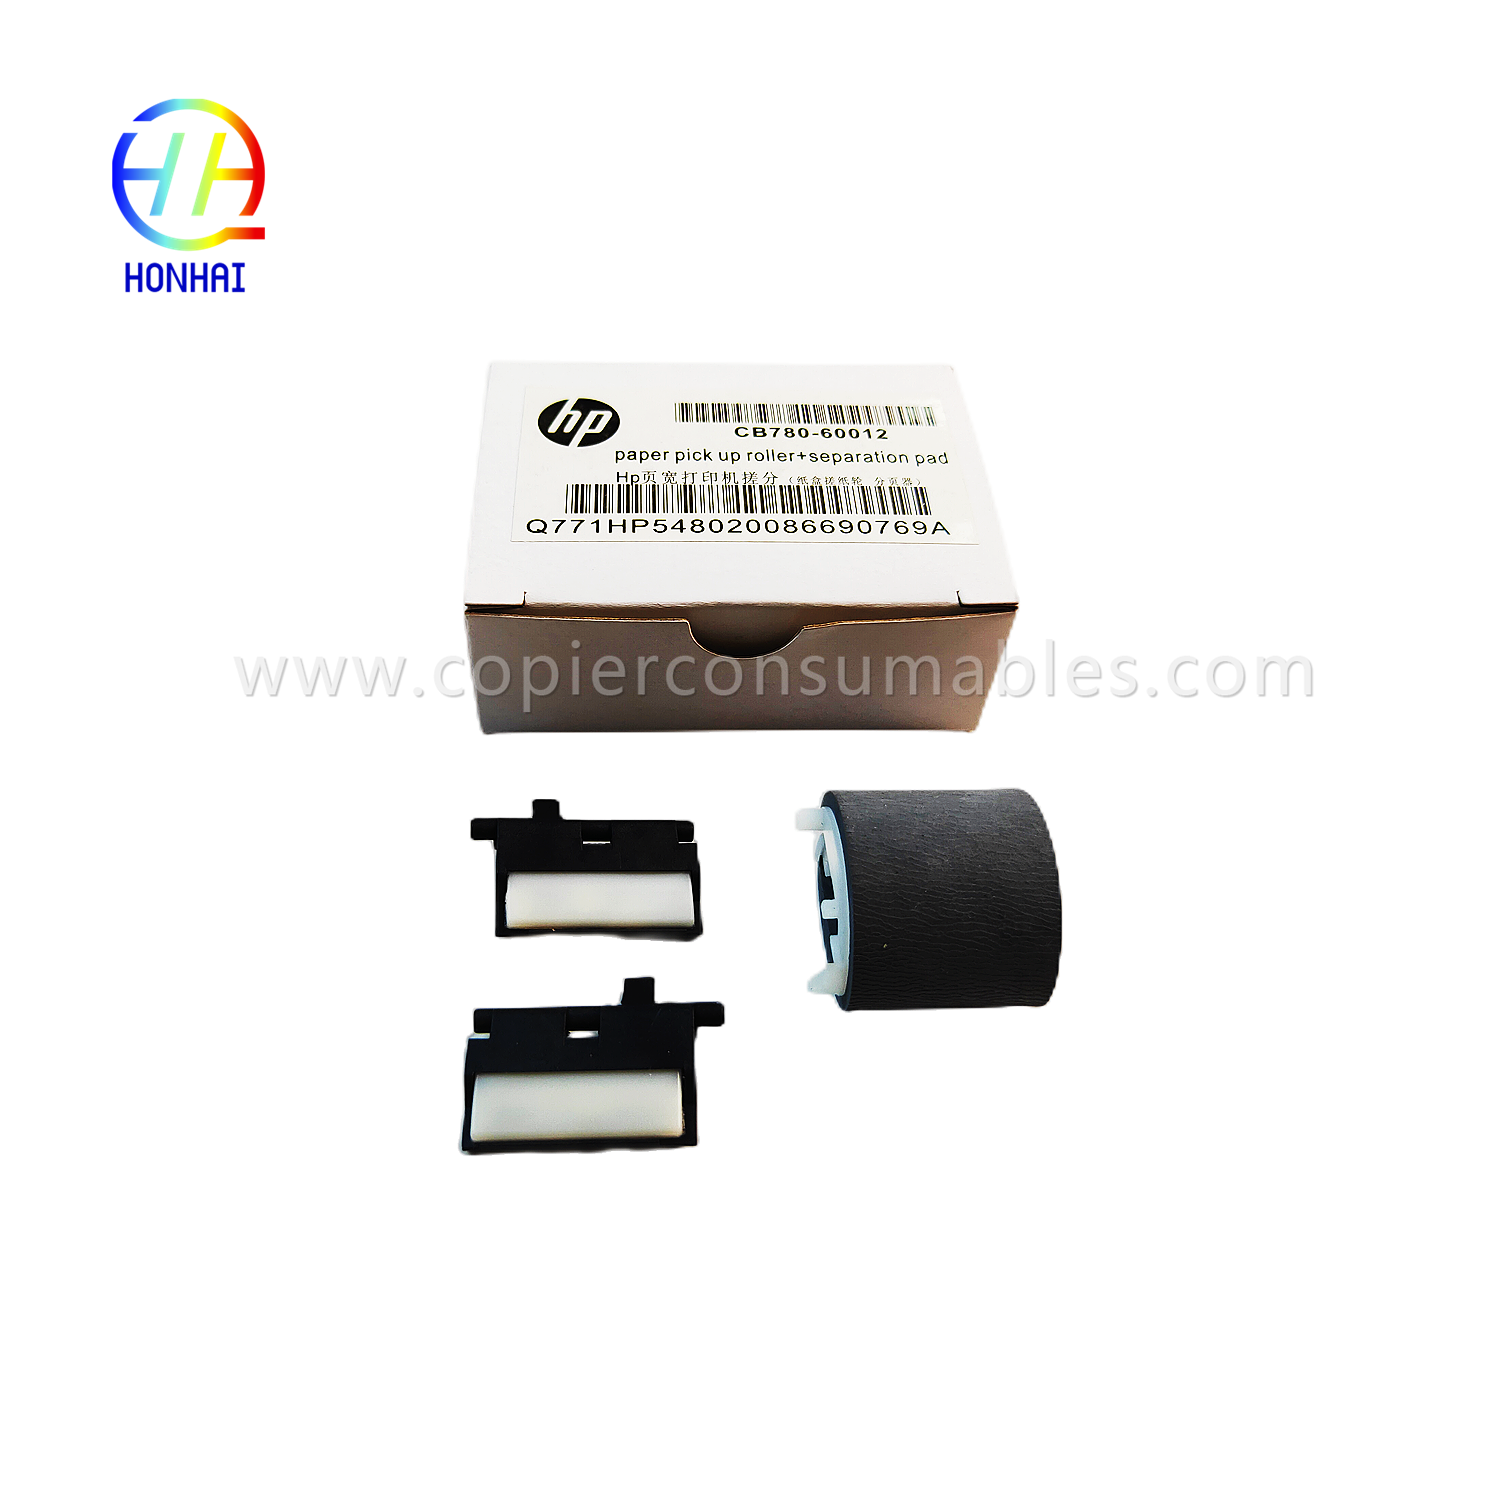 https://www.copierconsumables.com/paper-pickup-roller-separates-pad%ef%bc%88set%ef%bc%89for-hp-pagewide-x585z-x451dn-x476dn-x551dw-x576dw-566dn-5 452dn-477dn-552-577z-cb780-60012-product/